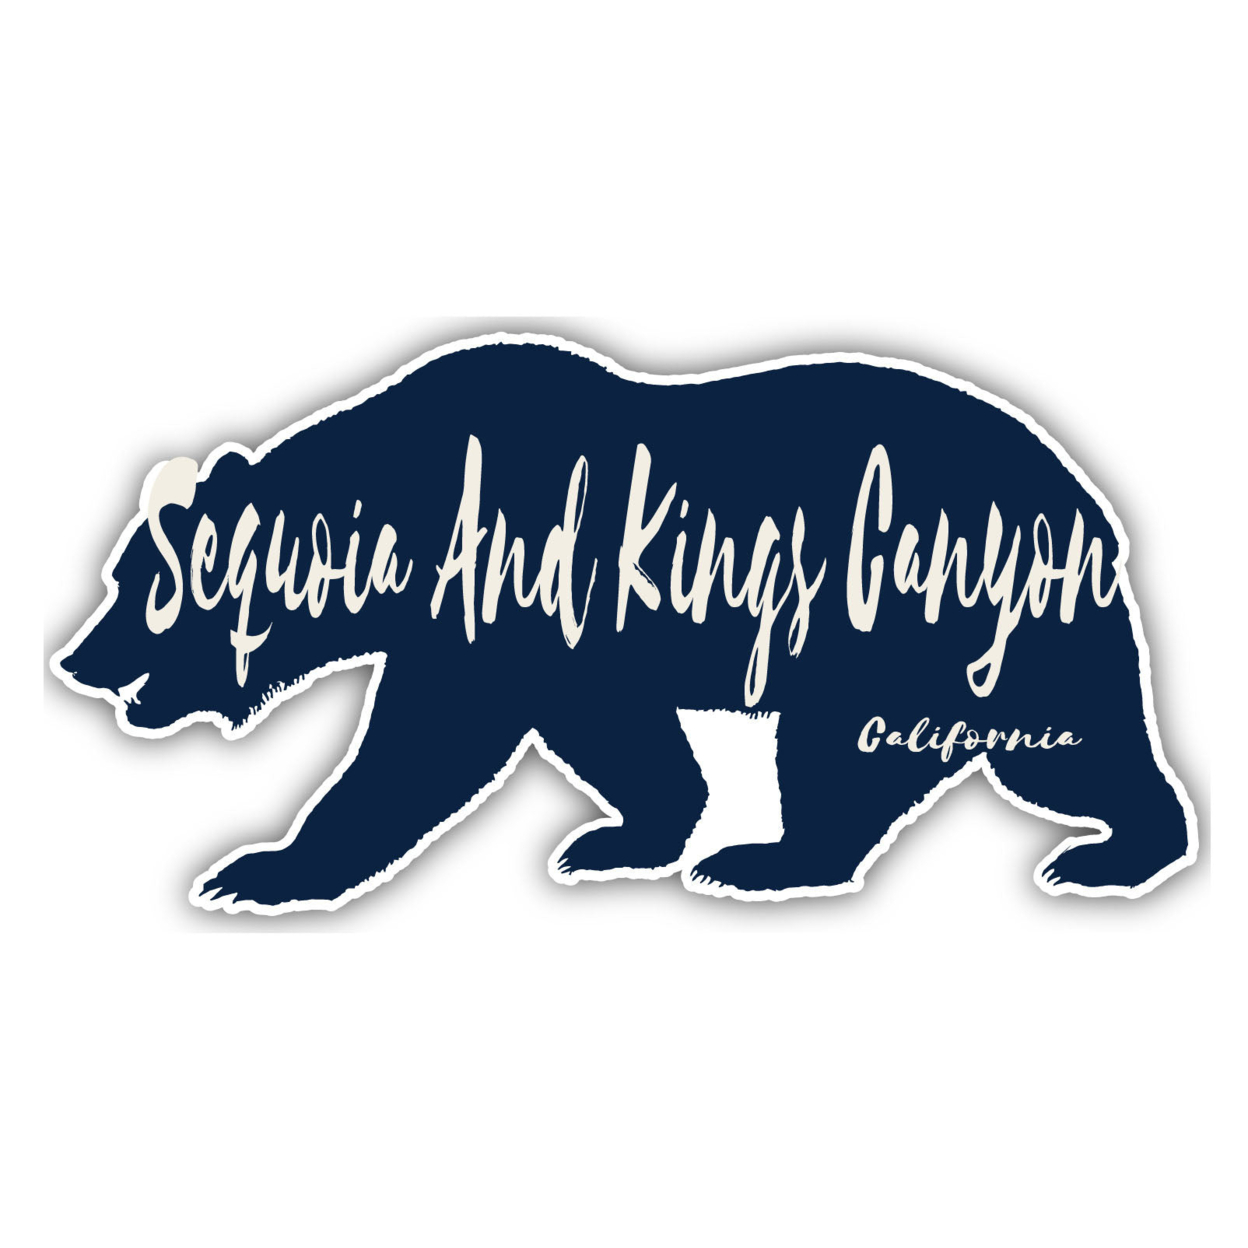 Sequoia And Kings Canyon California Souvenir Decorative Stickers (Choose Theme And Size) - Single Unit, 2-Inch, Bear